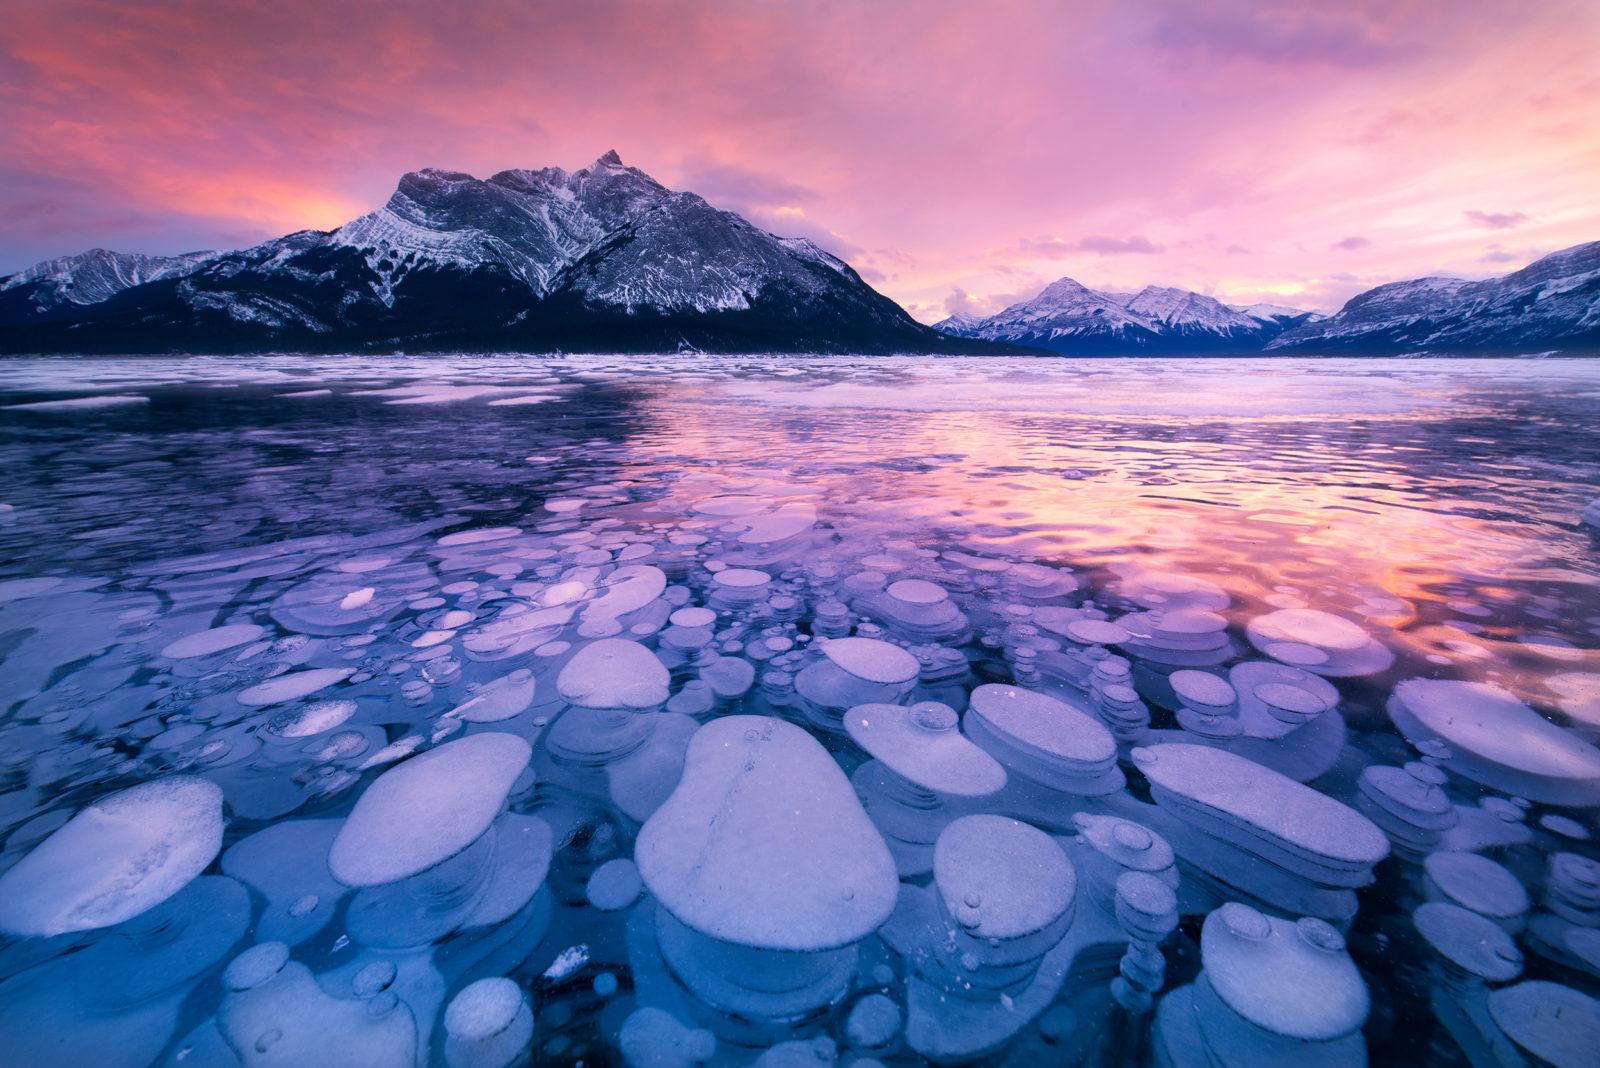 Abraham Lake in Clearwater County, Alberta, Canada